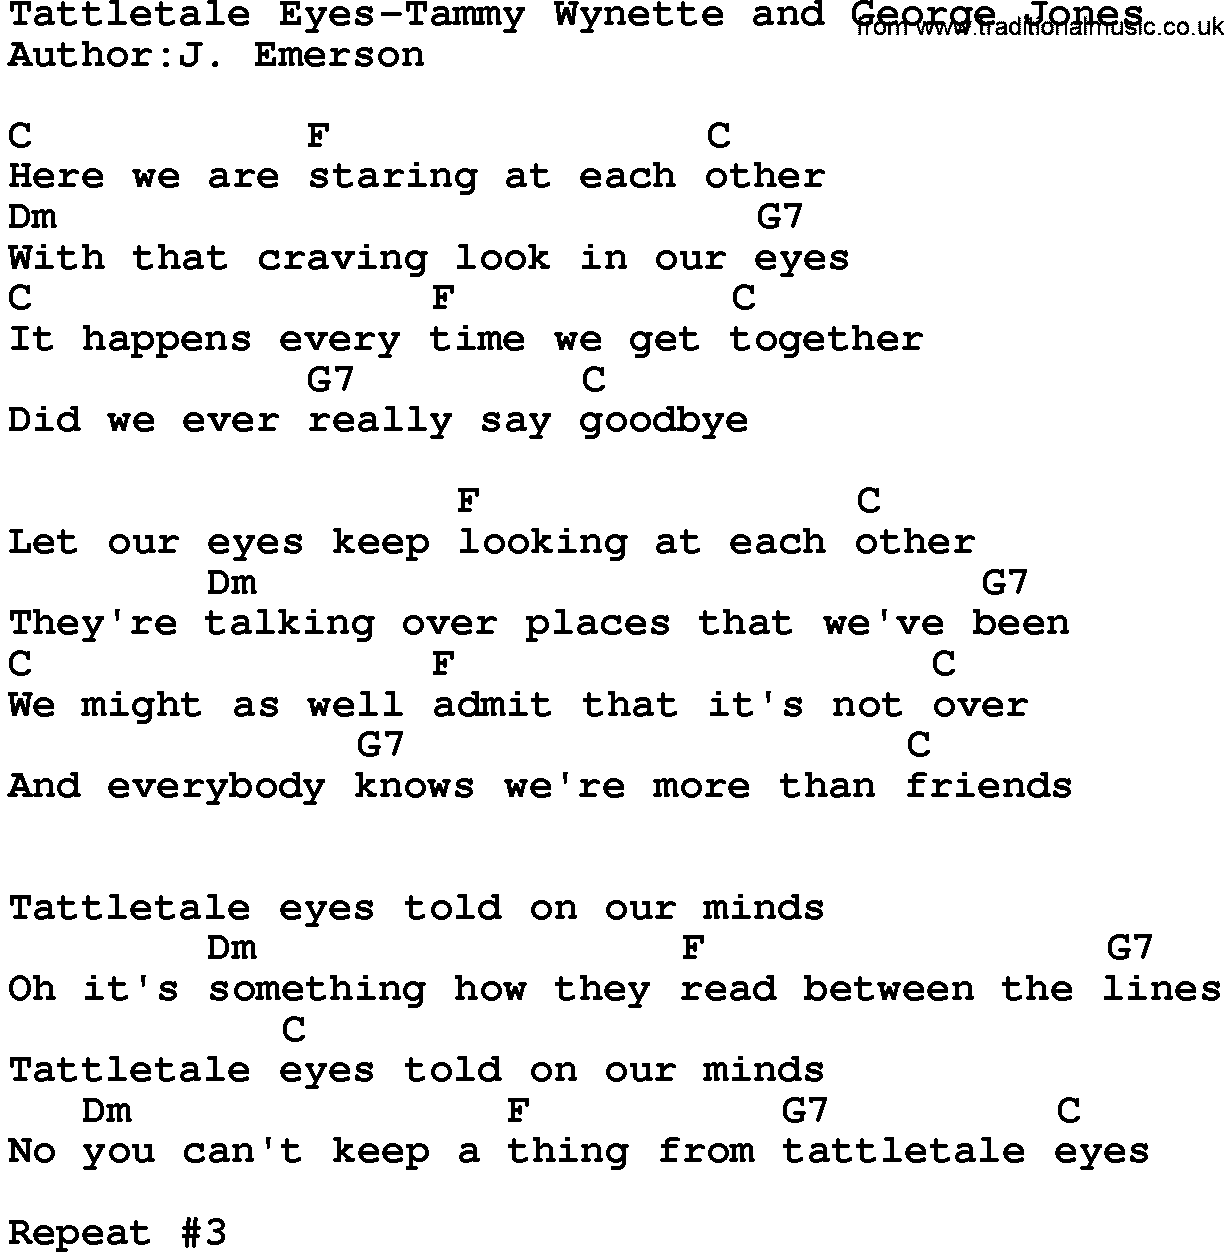 Country music song: Tattletale Eyes-Tammy Wynette And George Jones lyrics and chords